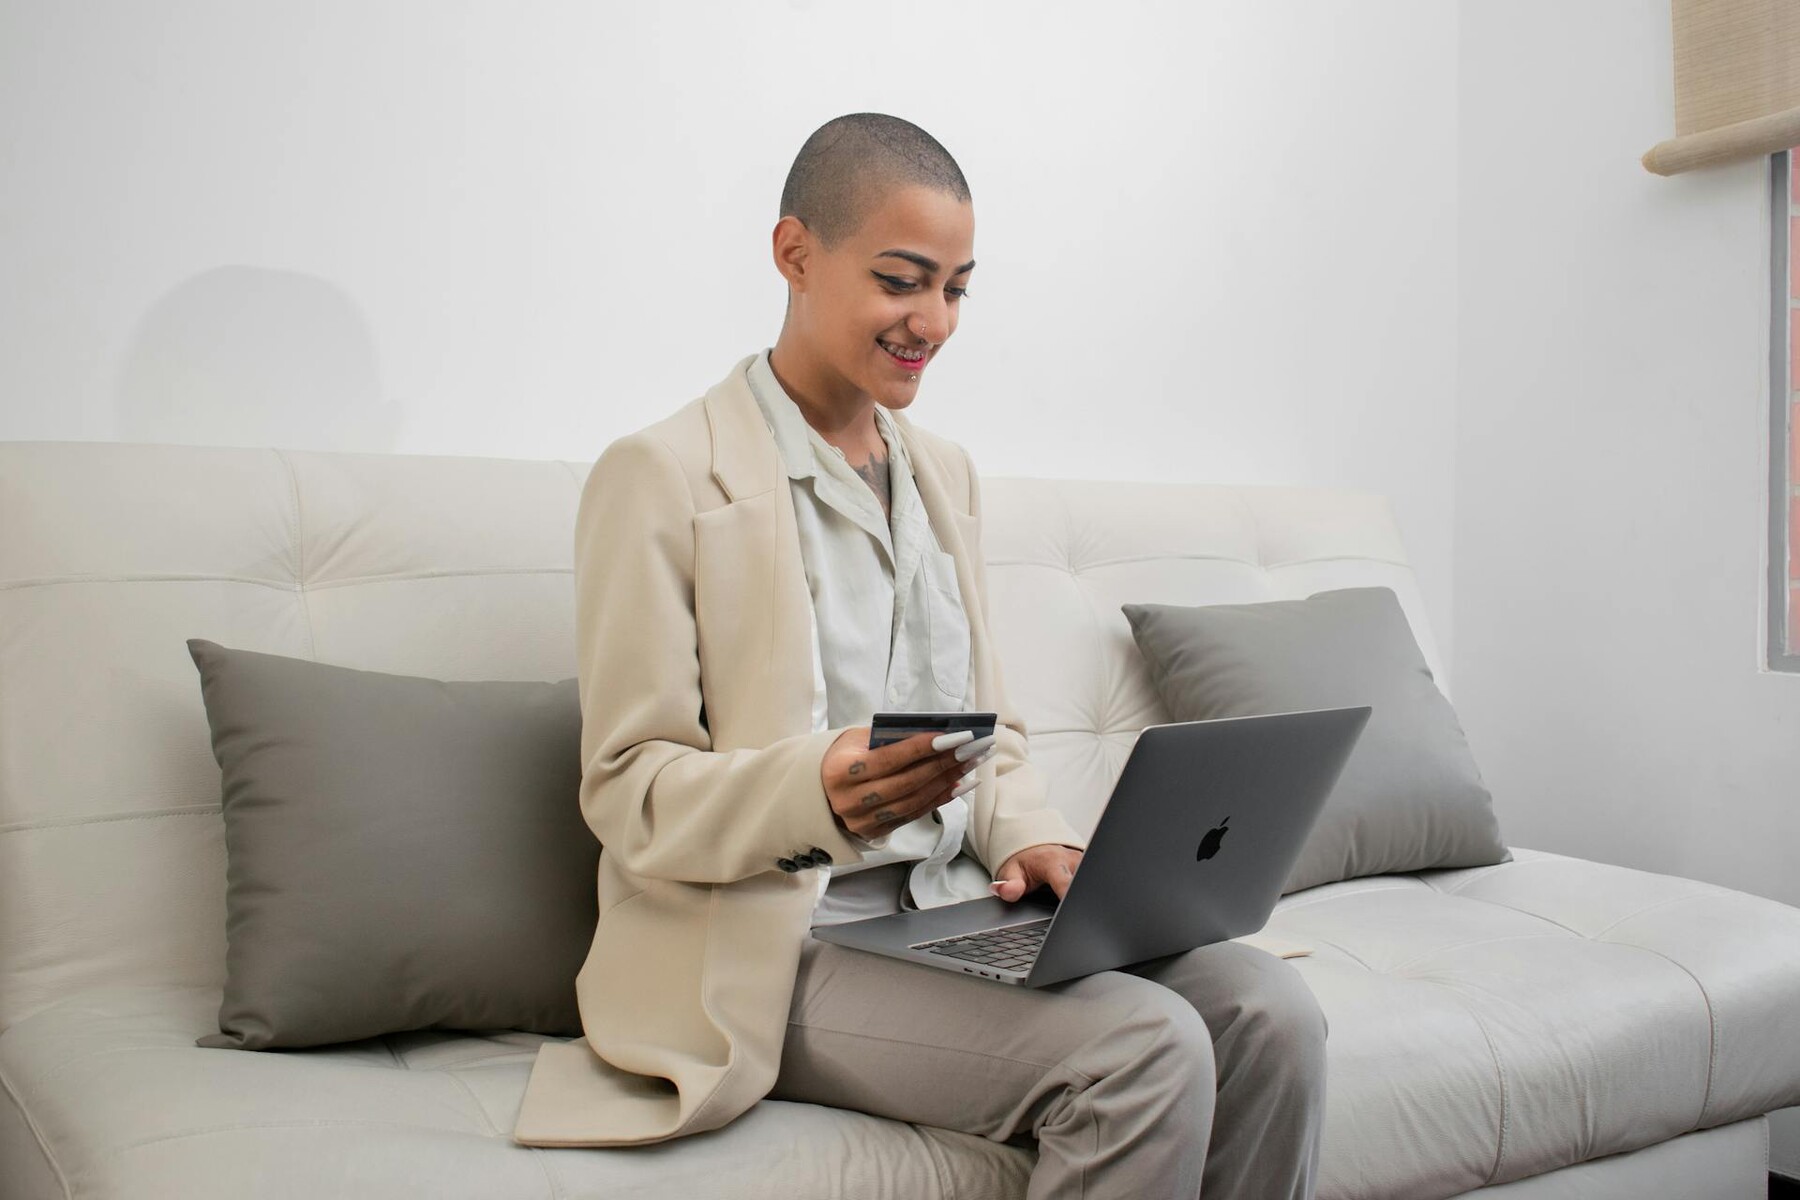 A lady in a suit holding a credit card, working on a laptop while seated on a couch